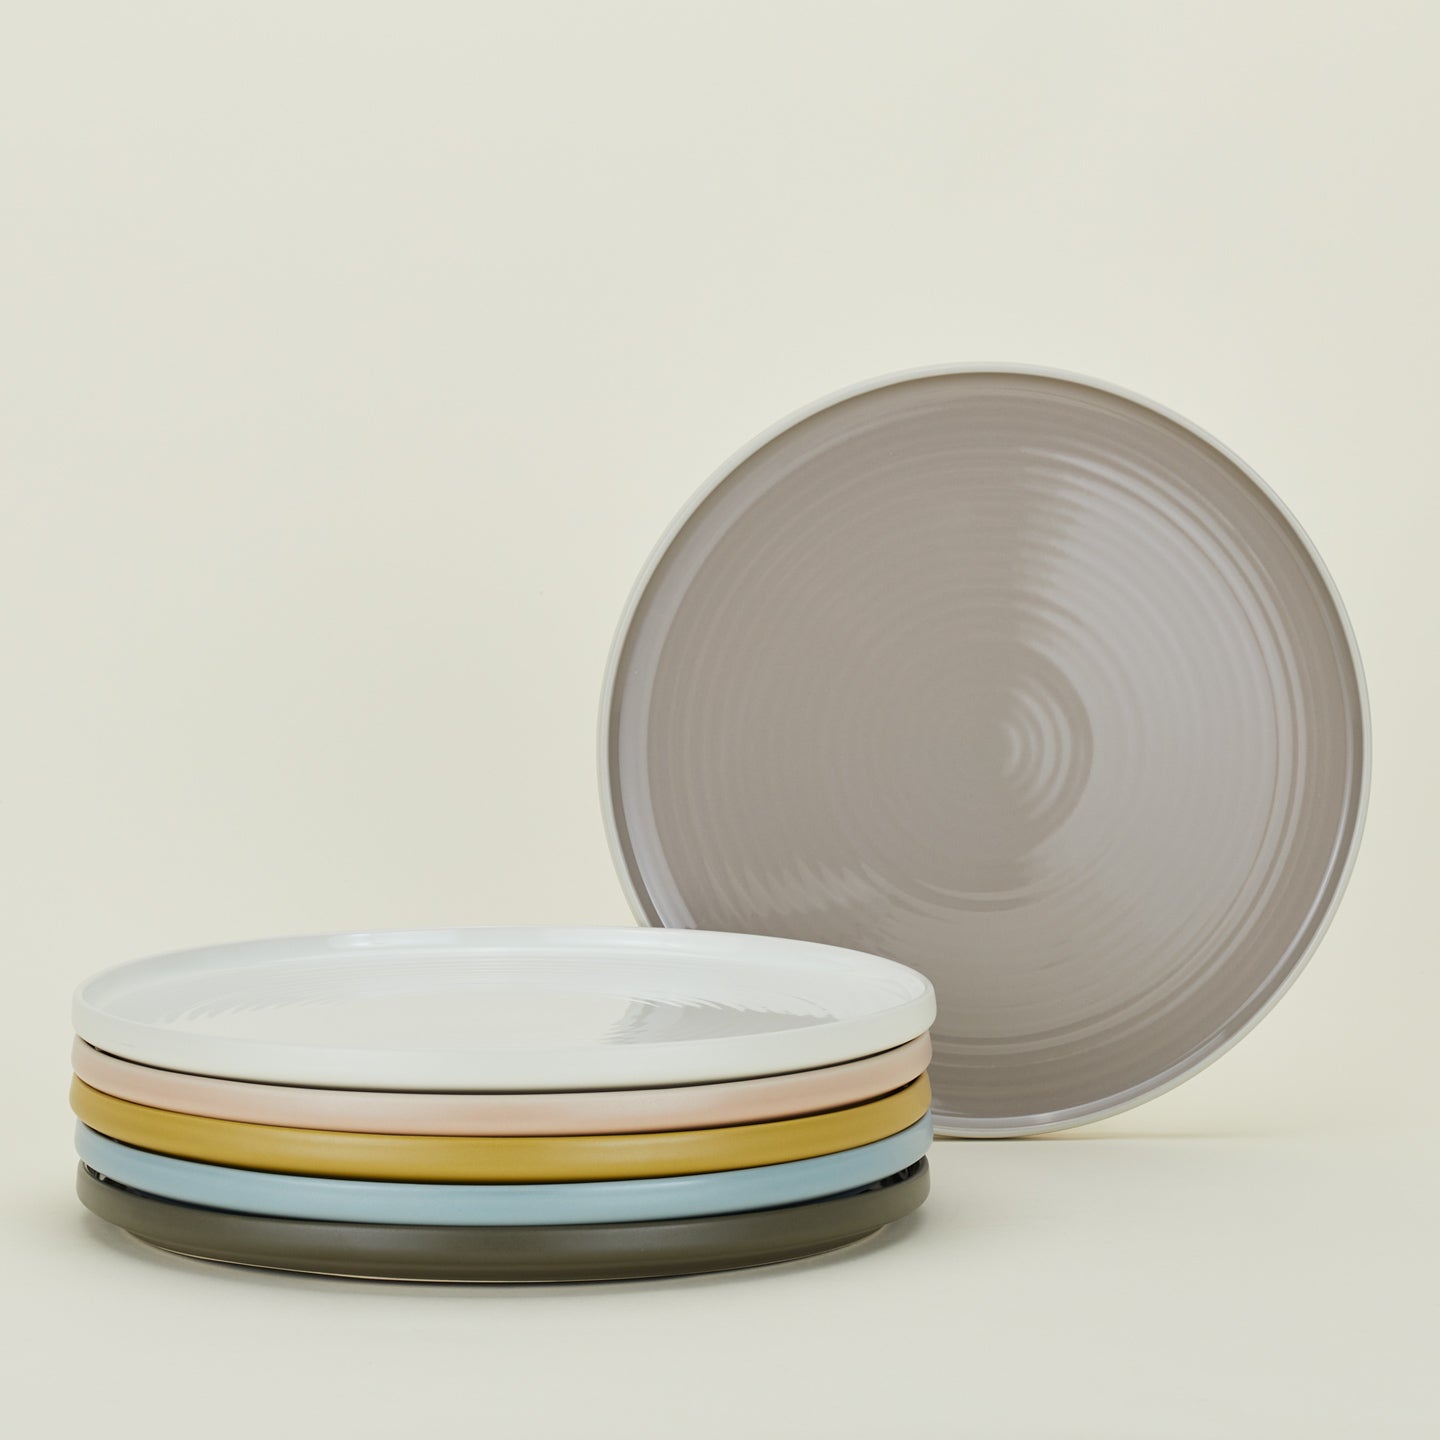 Stack of Essential Serving Platters in various colors.